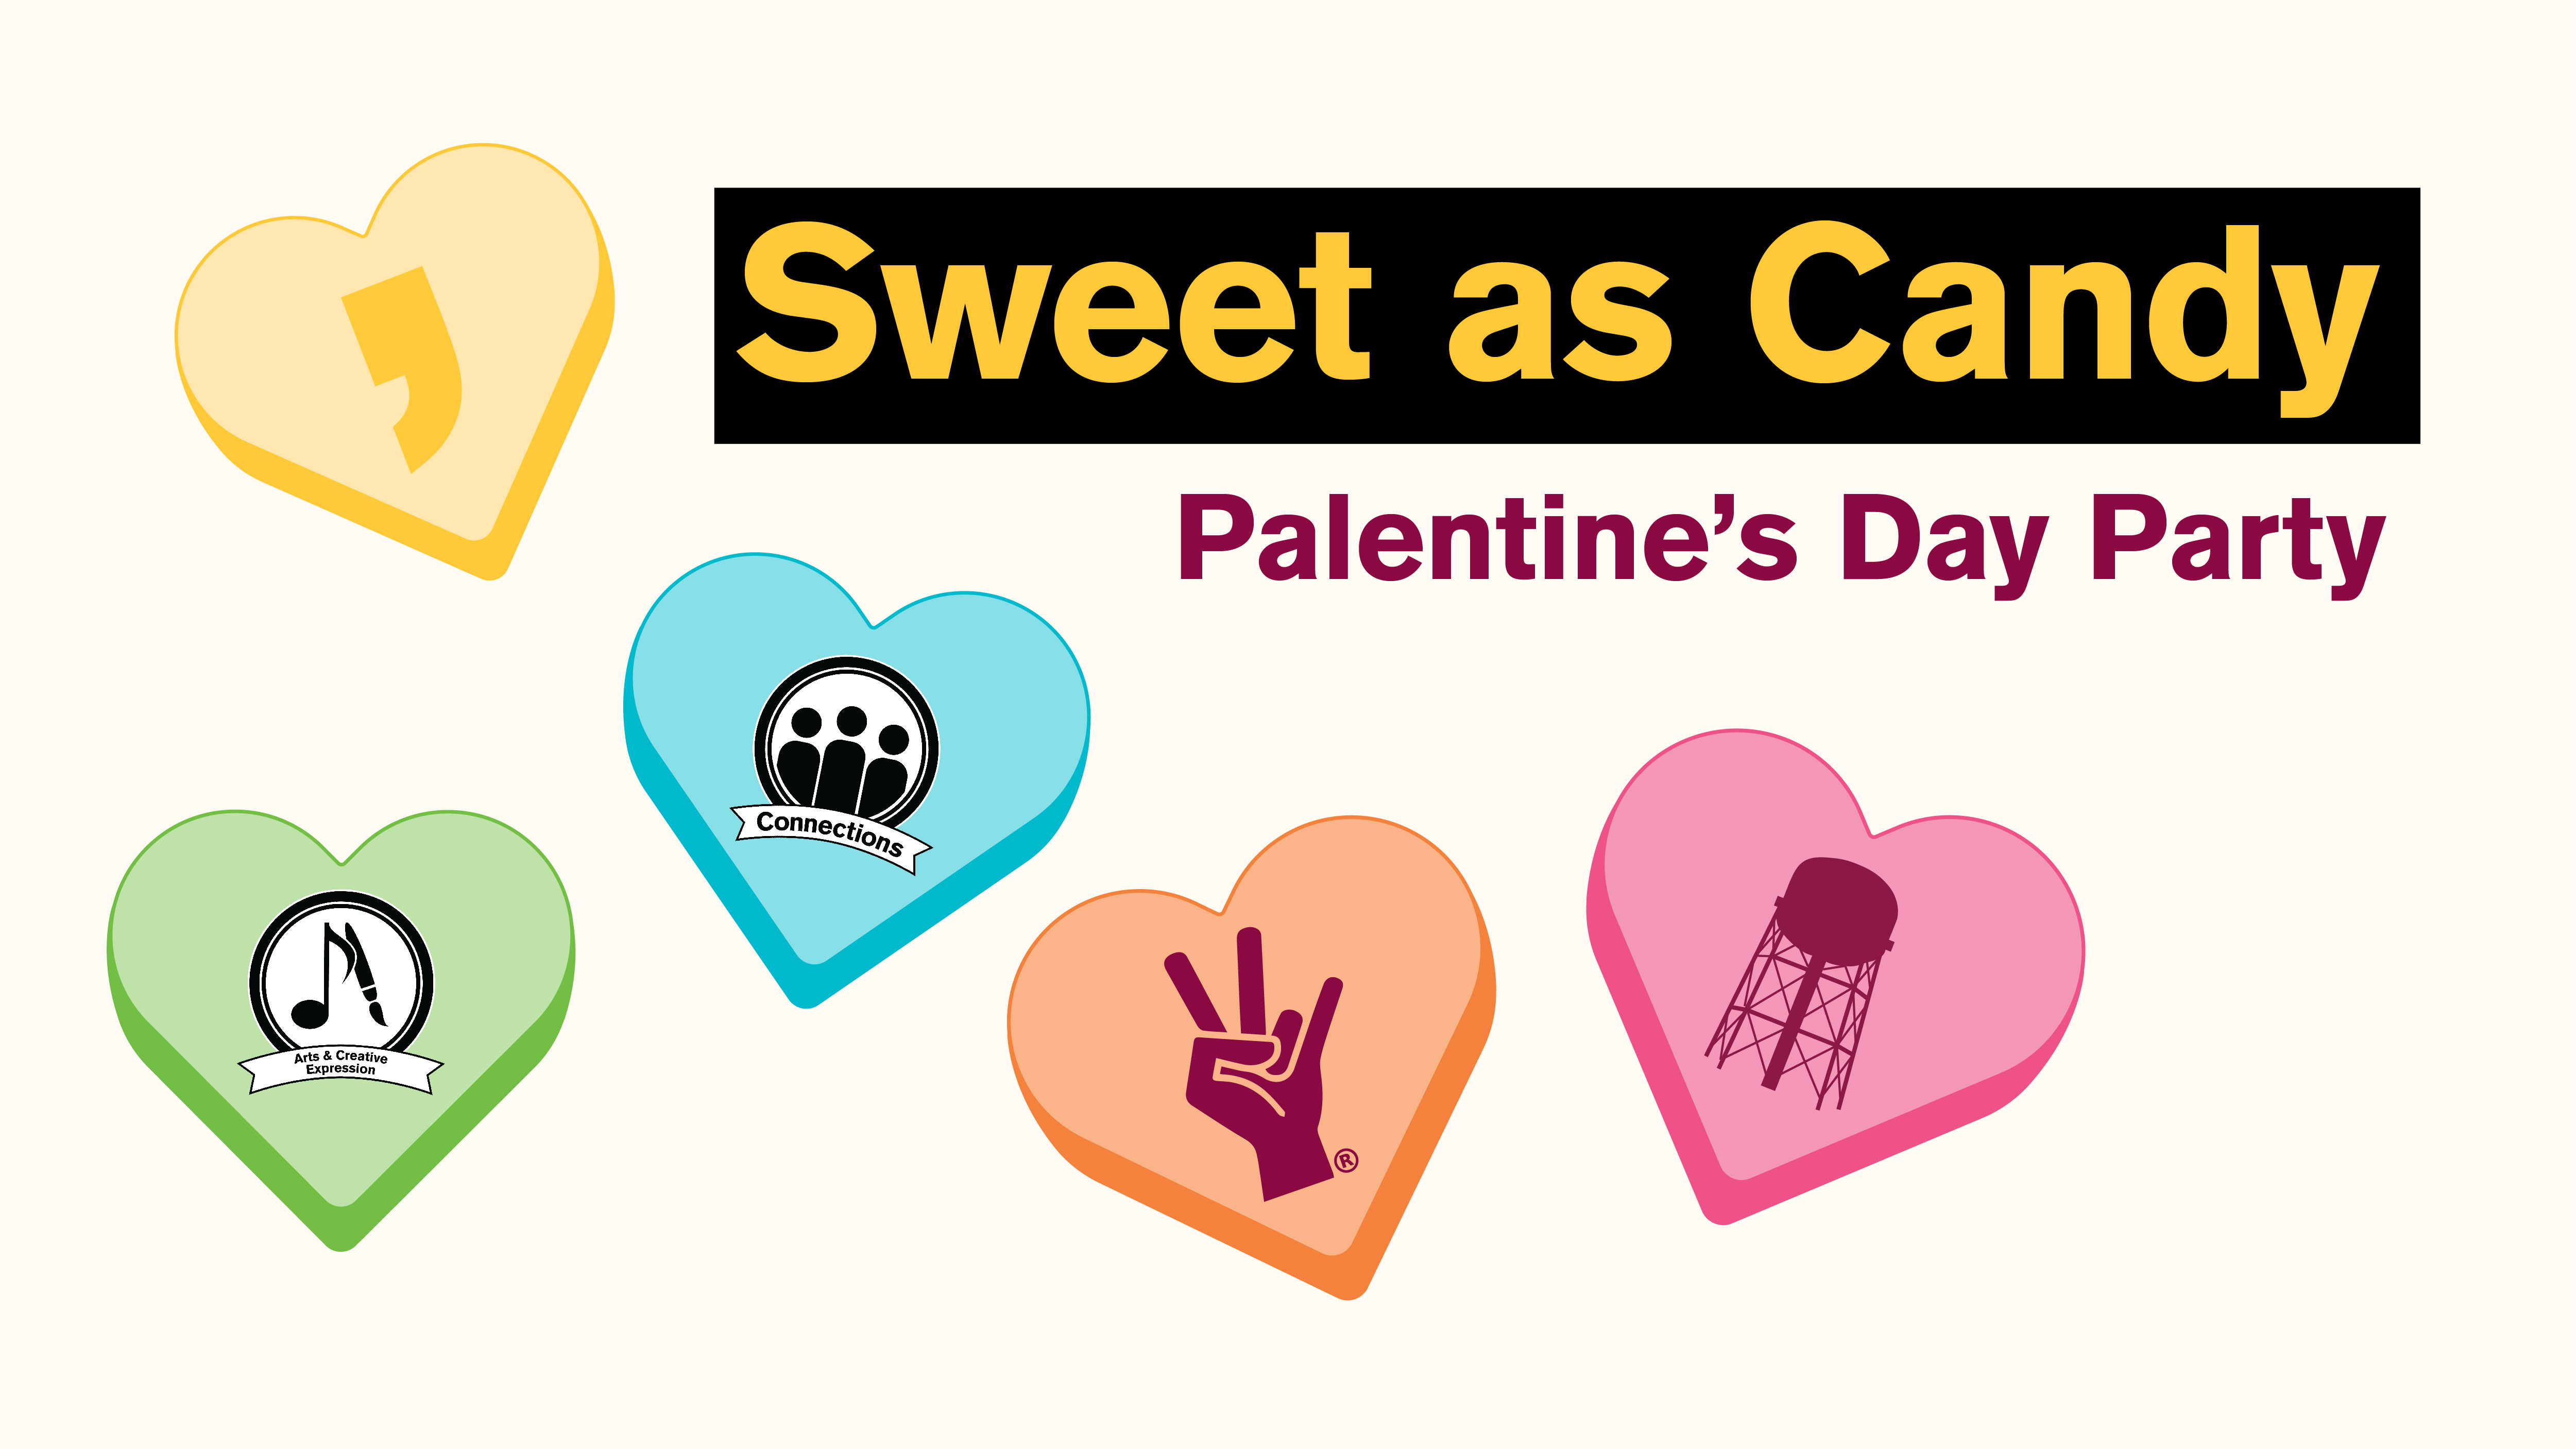 Sweeter than Candy: Palentine's Day Party